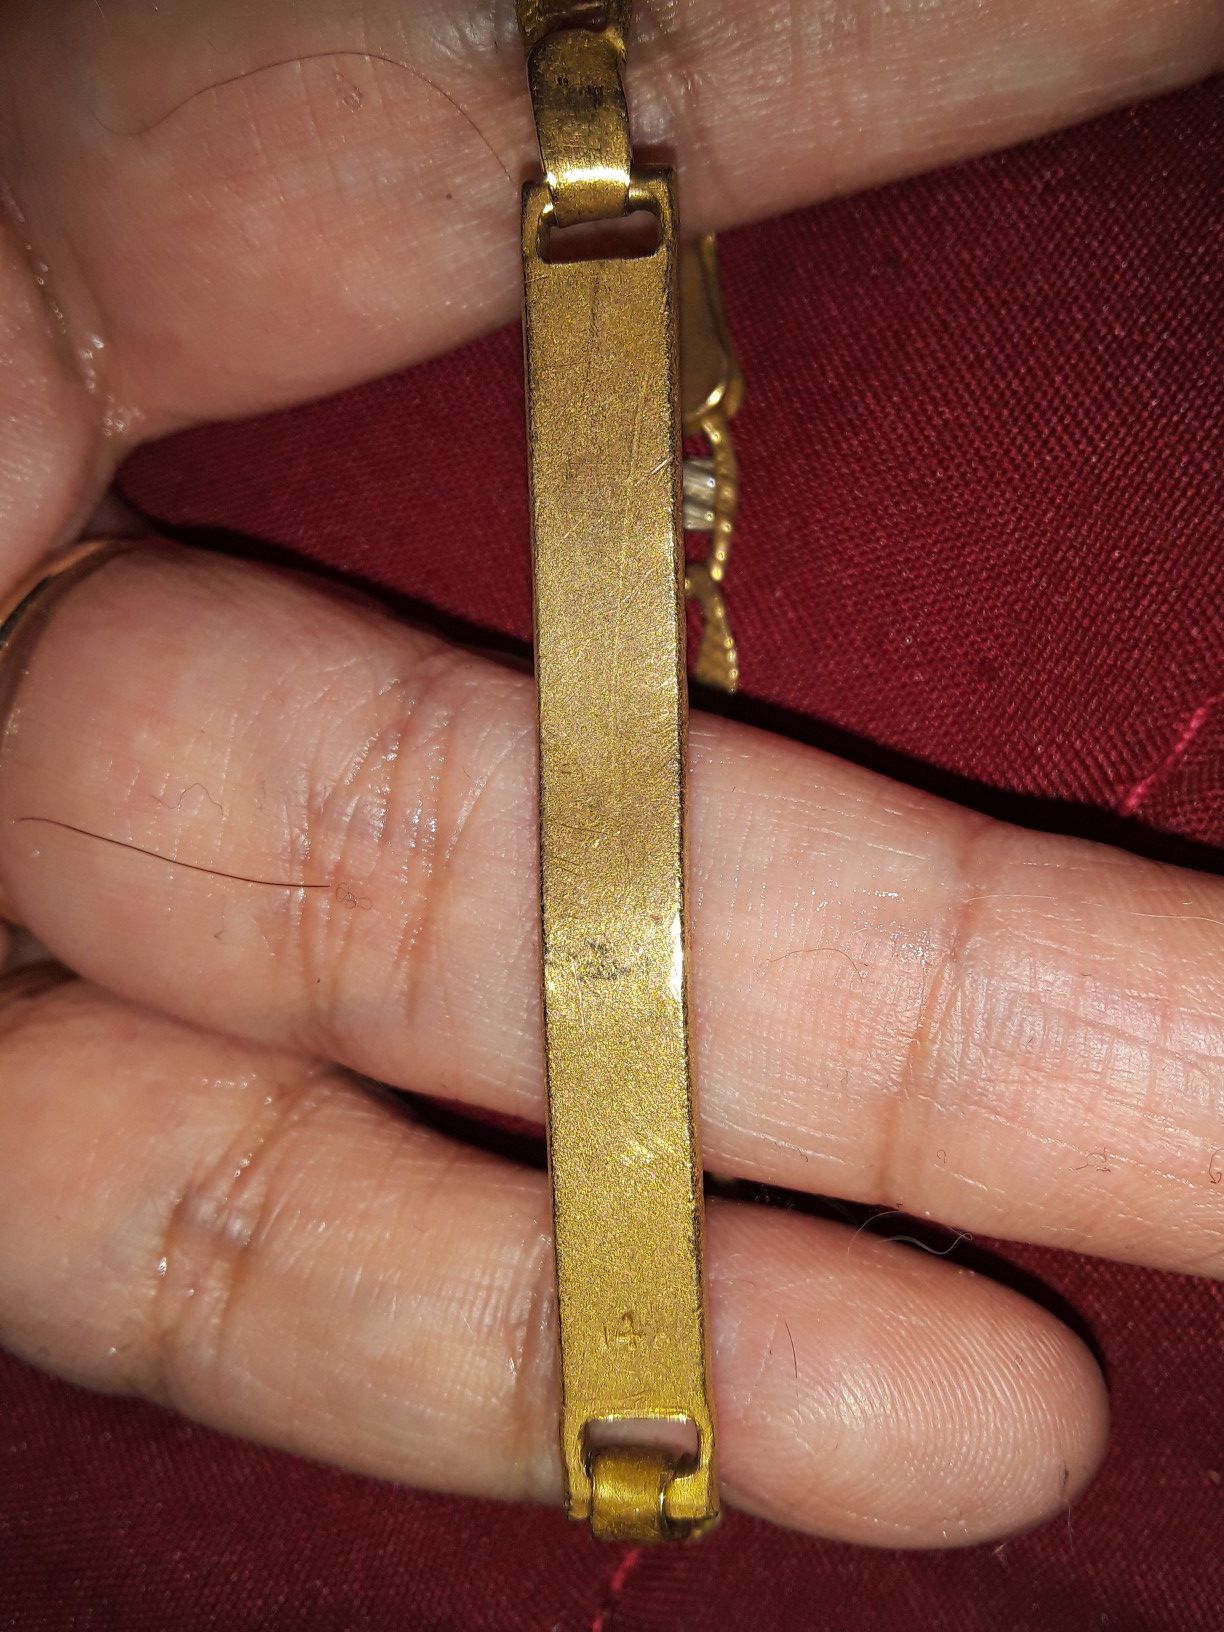 14k stamped bracelet I'm located at 35 ave northern